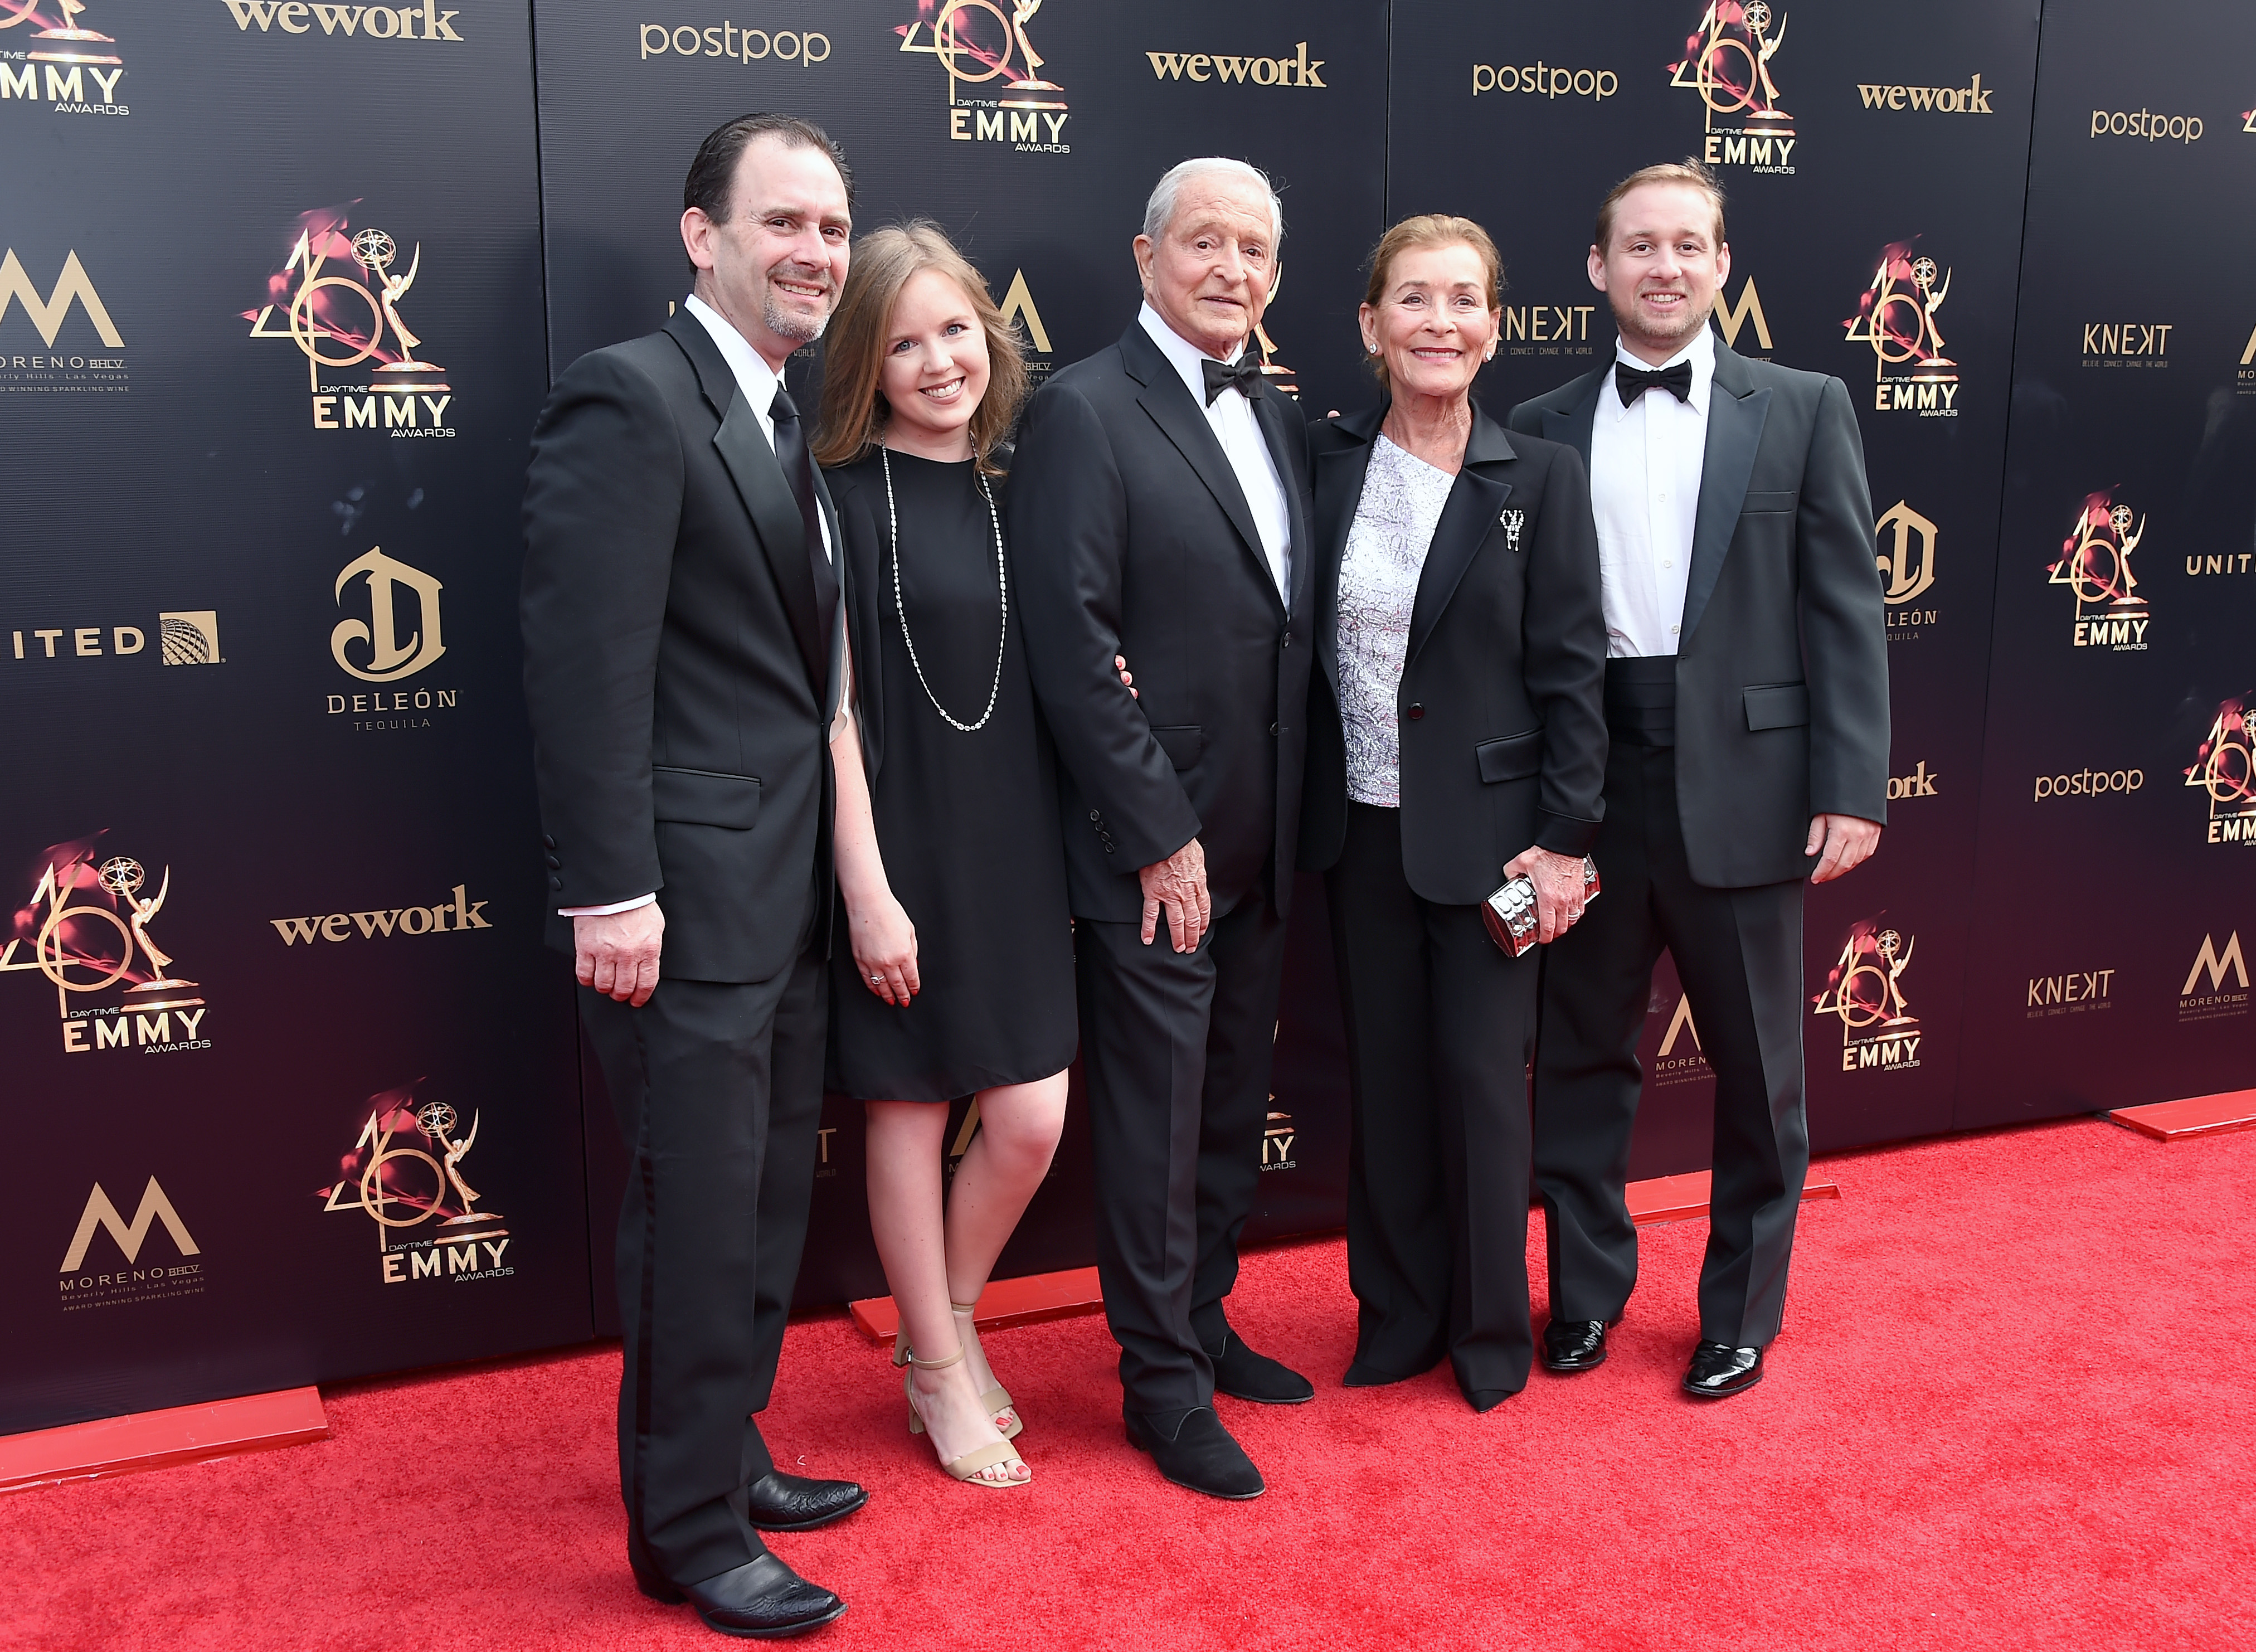 Judge Judy and  her family at Daytime Emmy Awards in Los Angeles in 2019 | Source: Getty Images